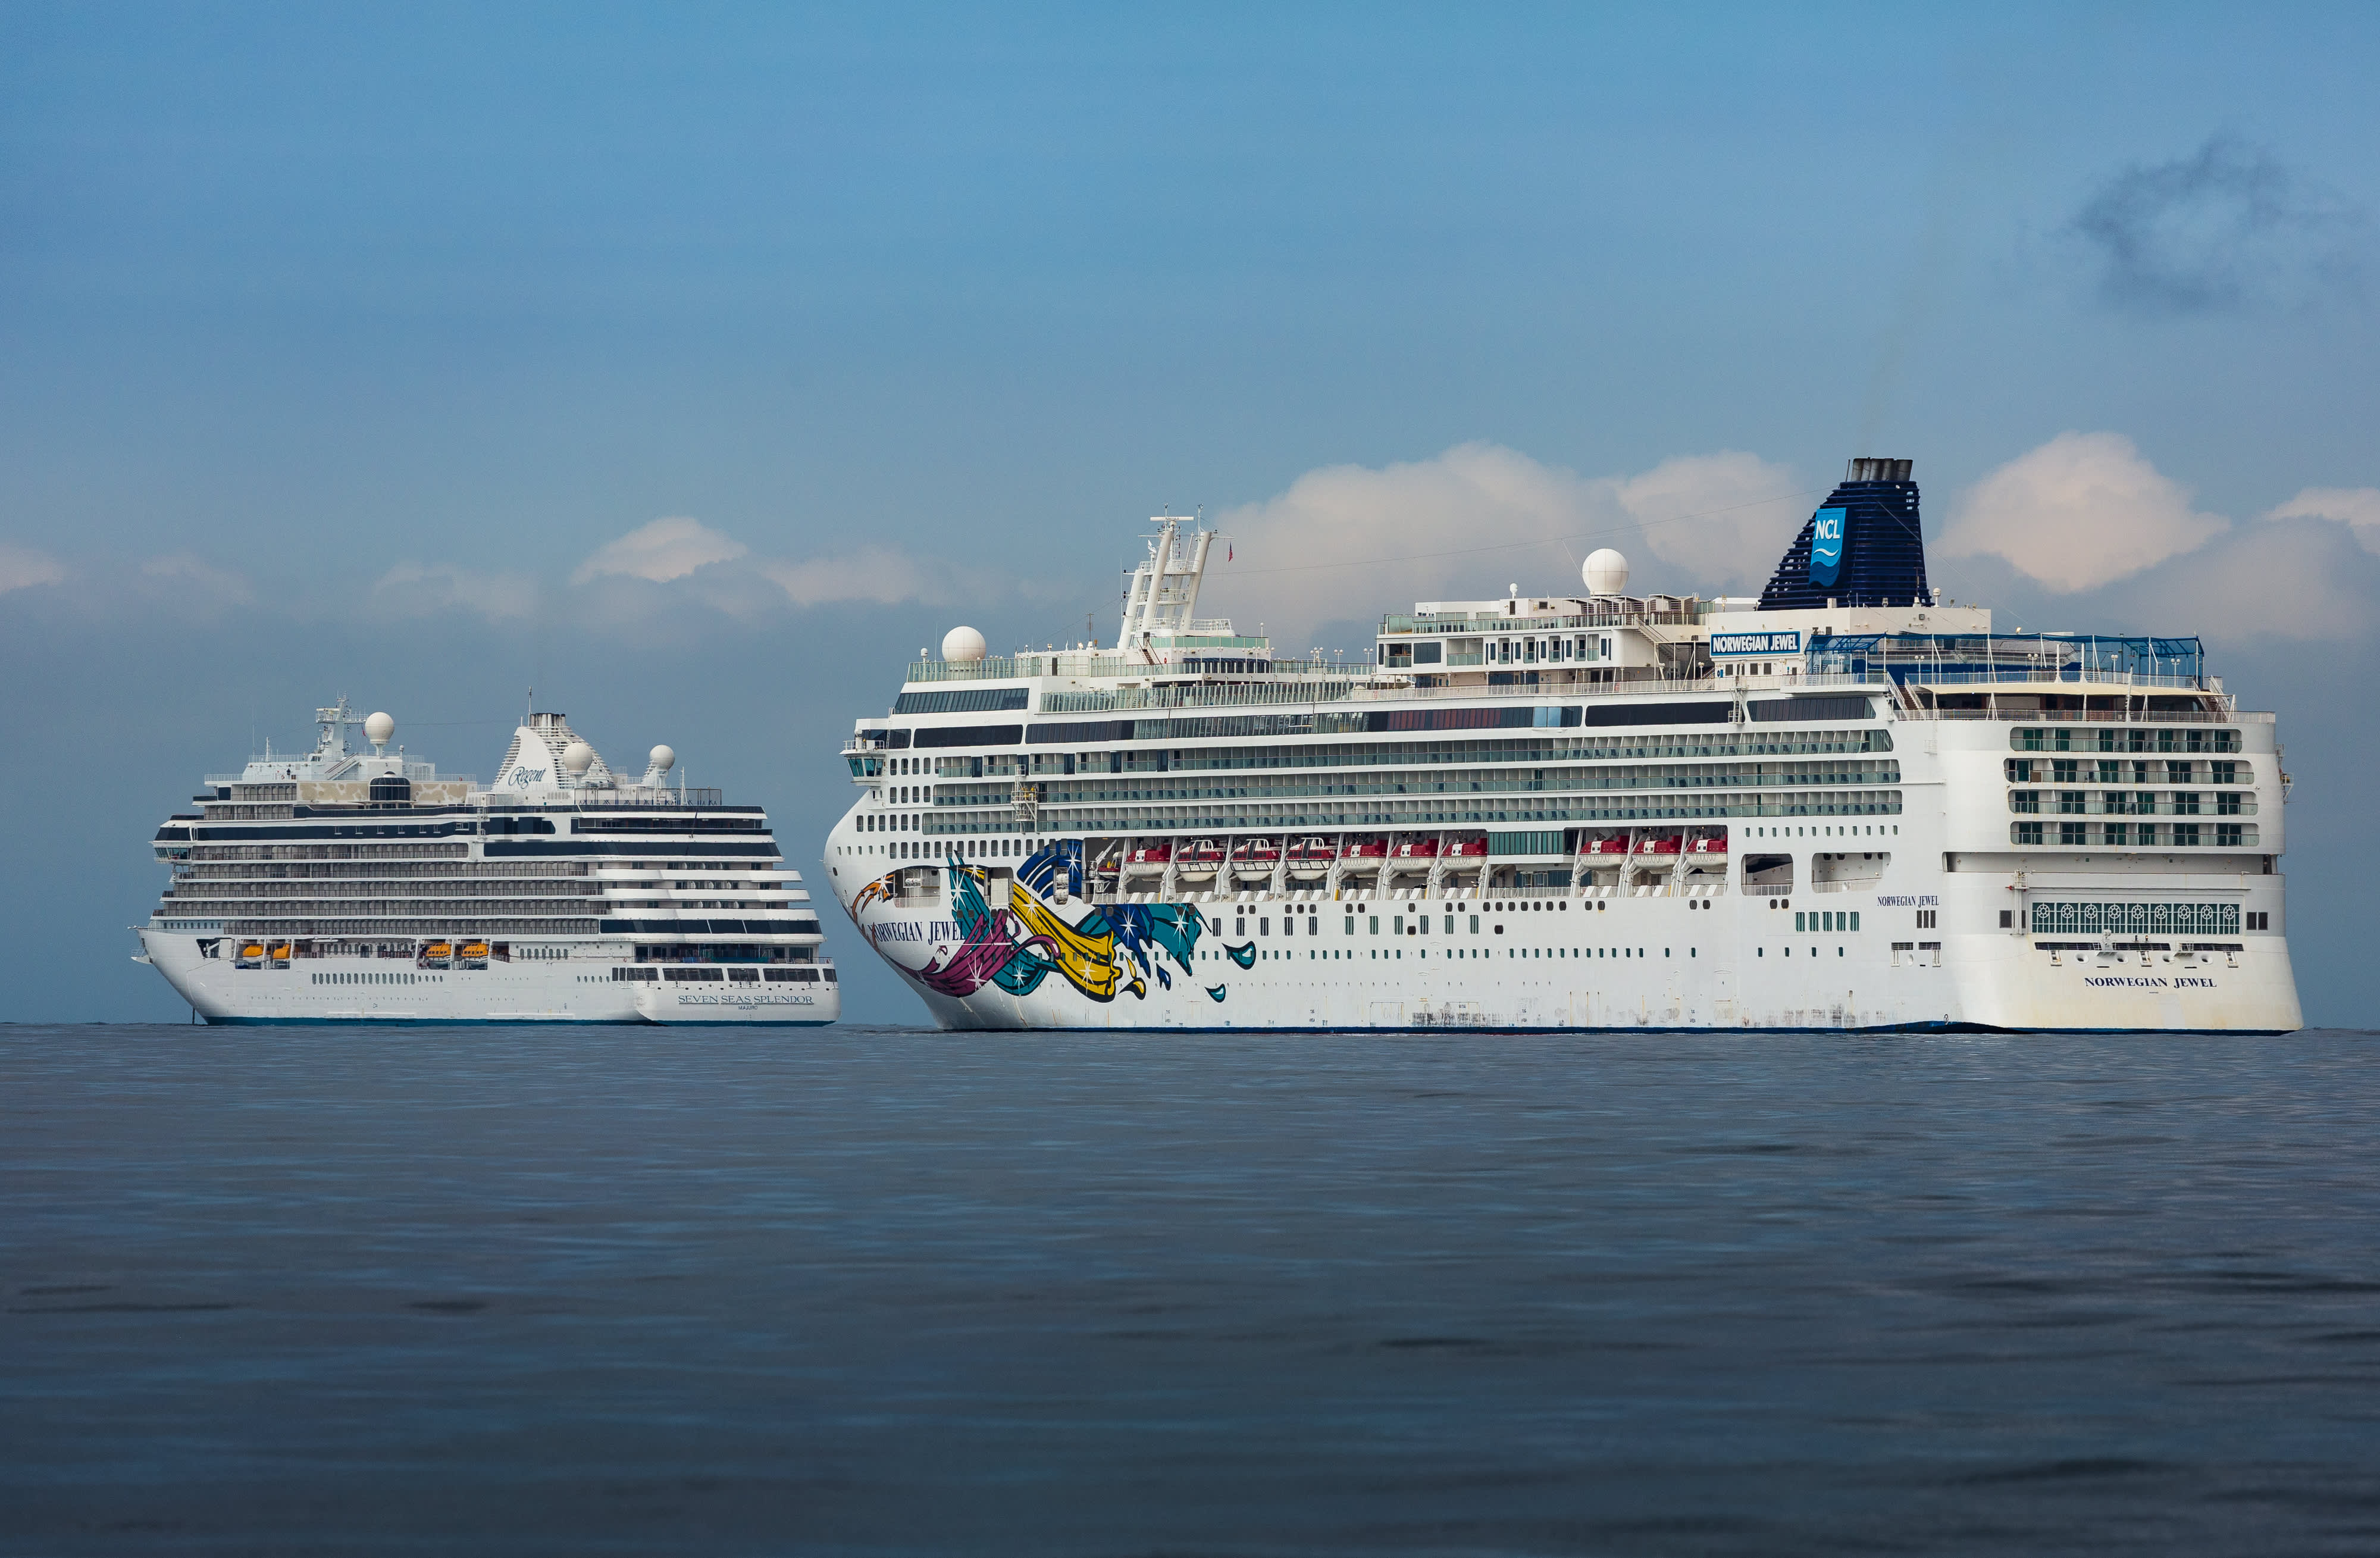 Norwegian CEO of Cruise Line on how the company’s cruise ships can sail safely again